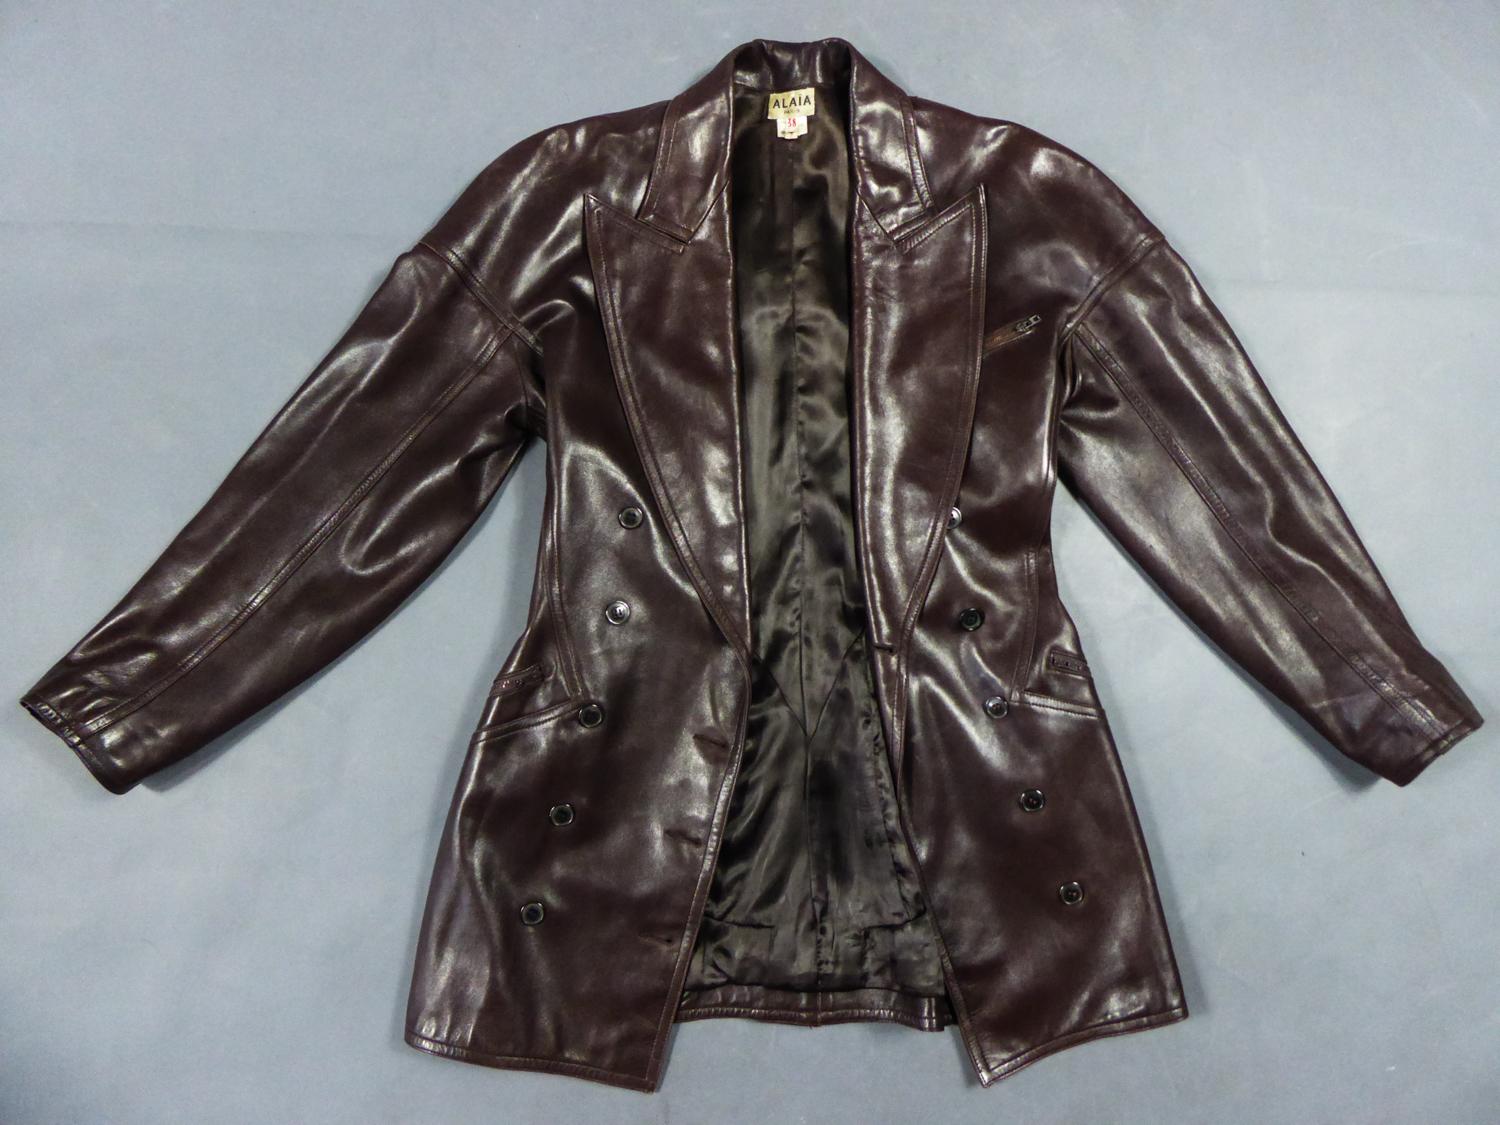 Circa 1985-1990
France

Beautiful Blazer Jacket in flexible brown leather from Azzedine Alaïa, iconic piece of Collection, dating from the 1980s. Typical of the master's cut work, this jacket has several leather inserts with double stitching